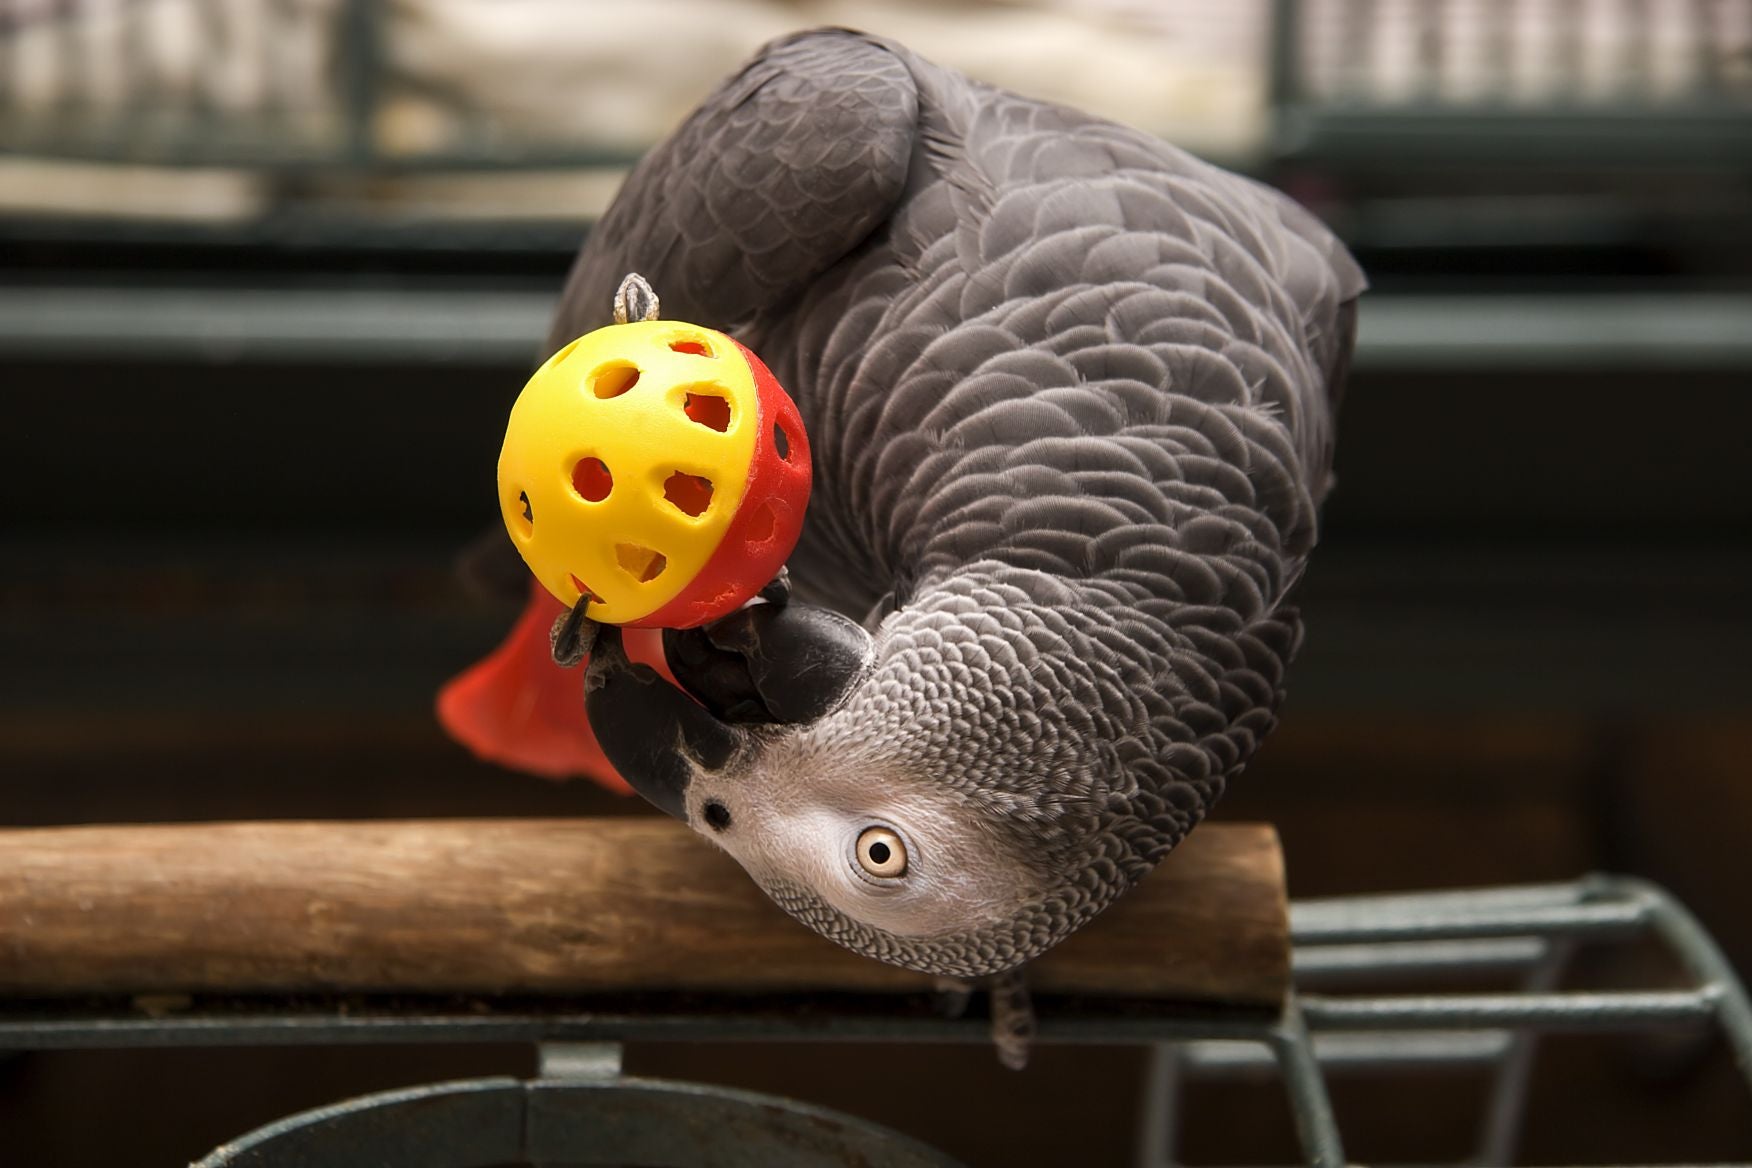 Parrot playing with a toy